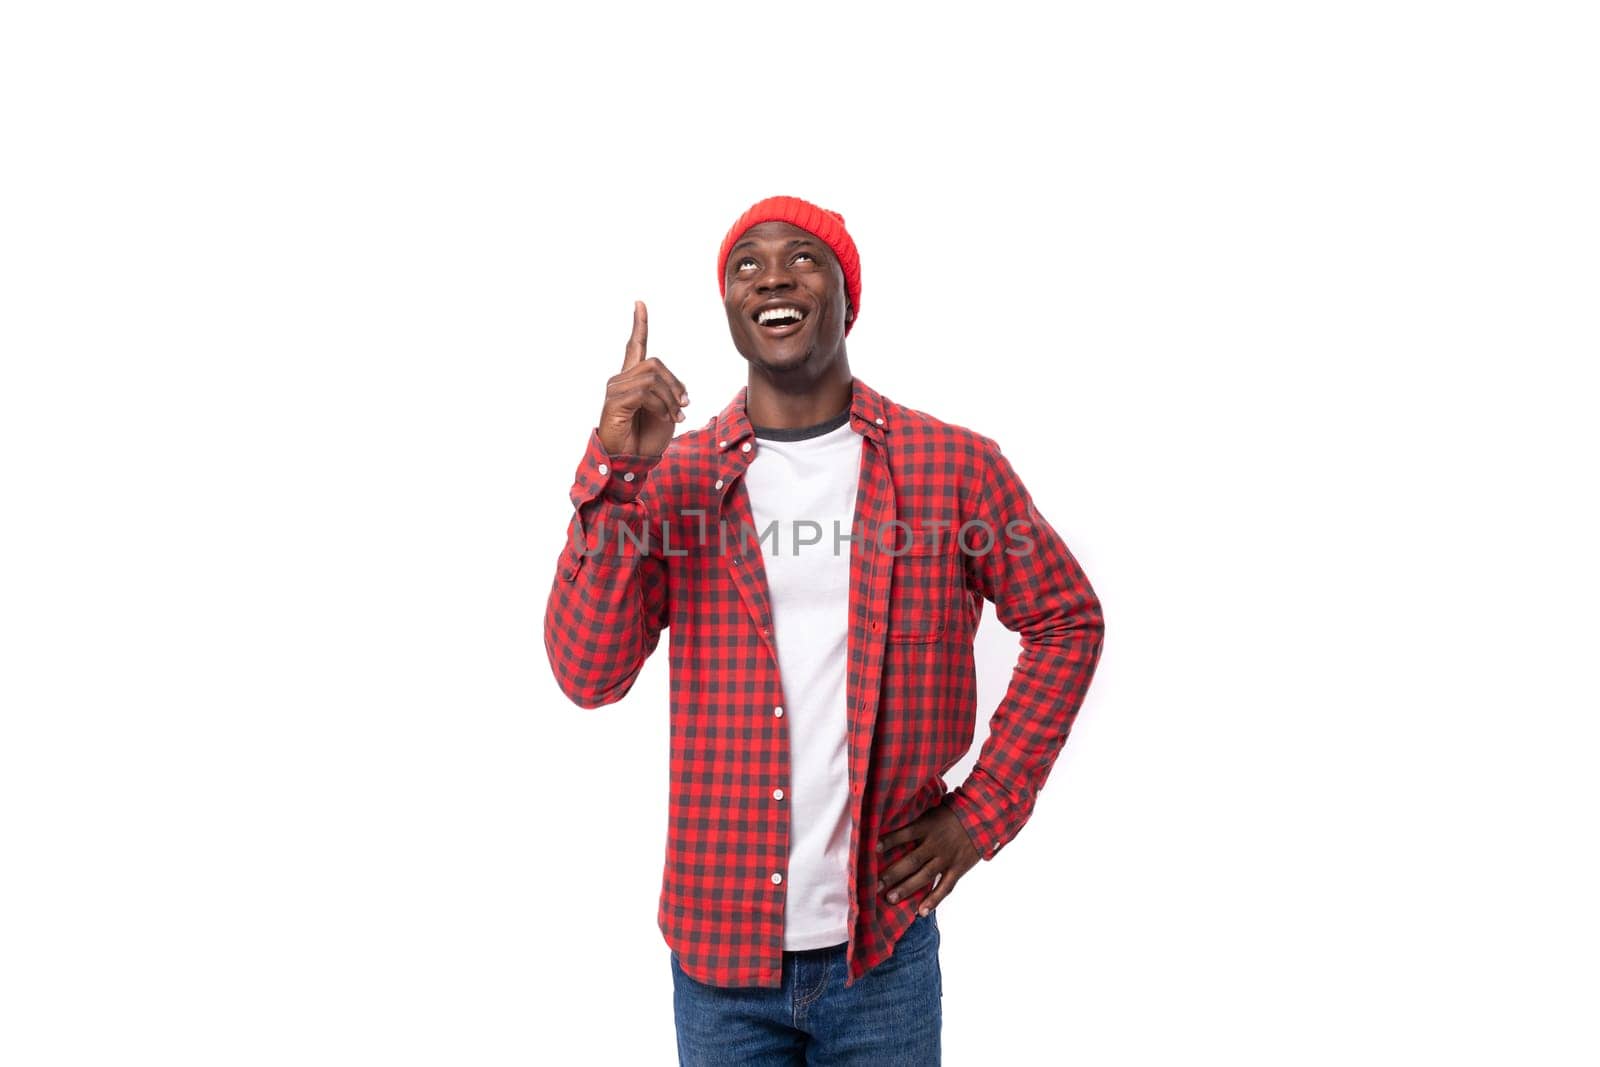 handsome joyful dark-skinned man in a casual plaid shirt of a model appearance with inspiration wants to communicate an idea on a white background with copy space.